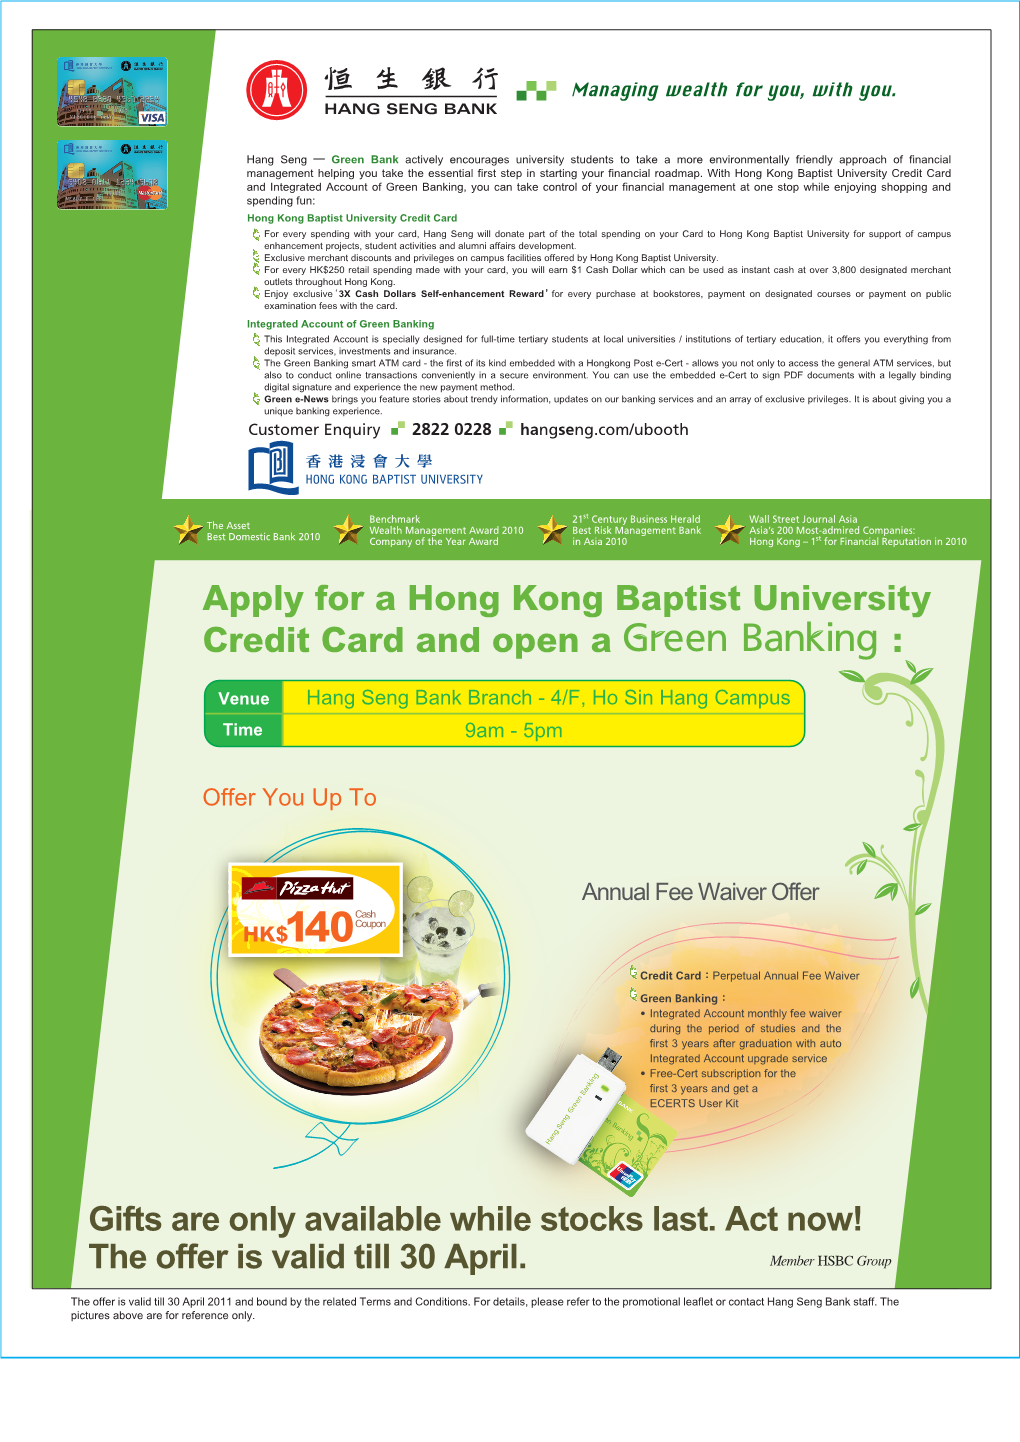 Apply for a Hong Kong Baptist University Credit Card and Open a